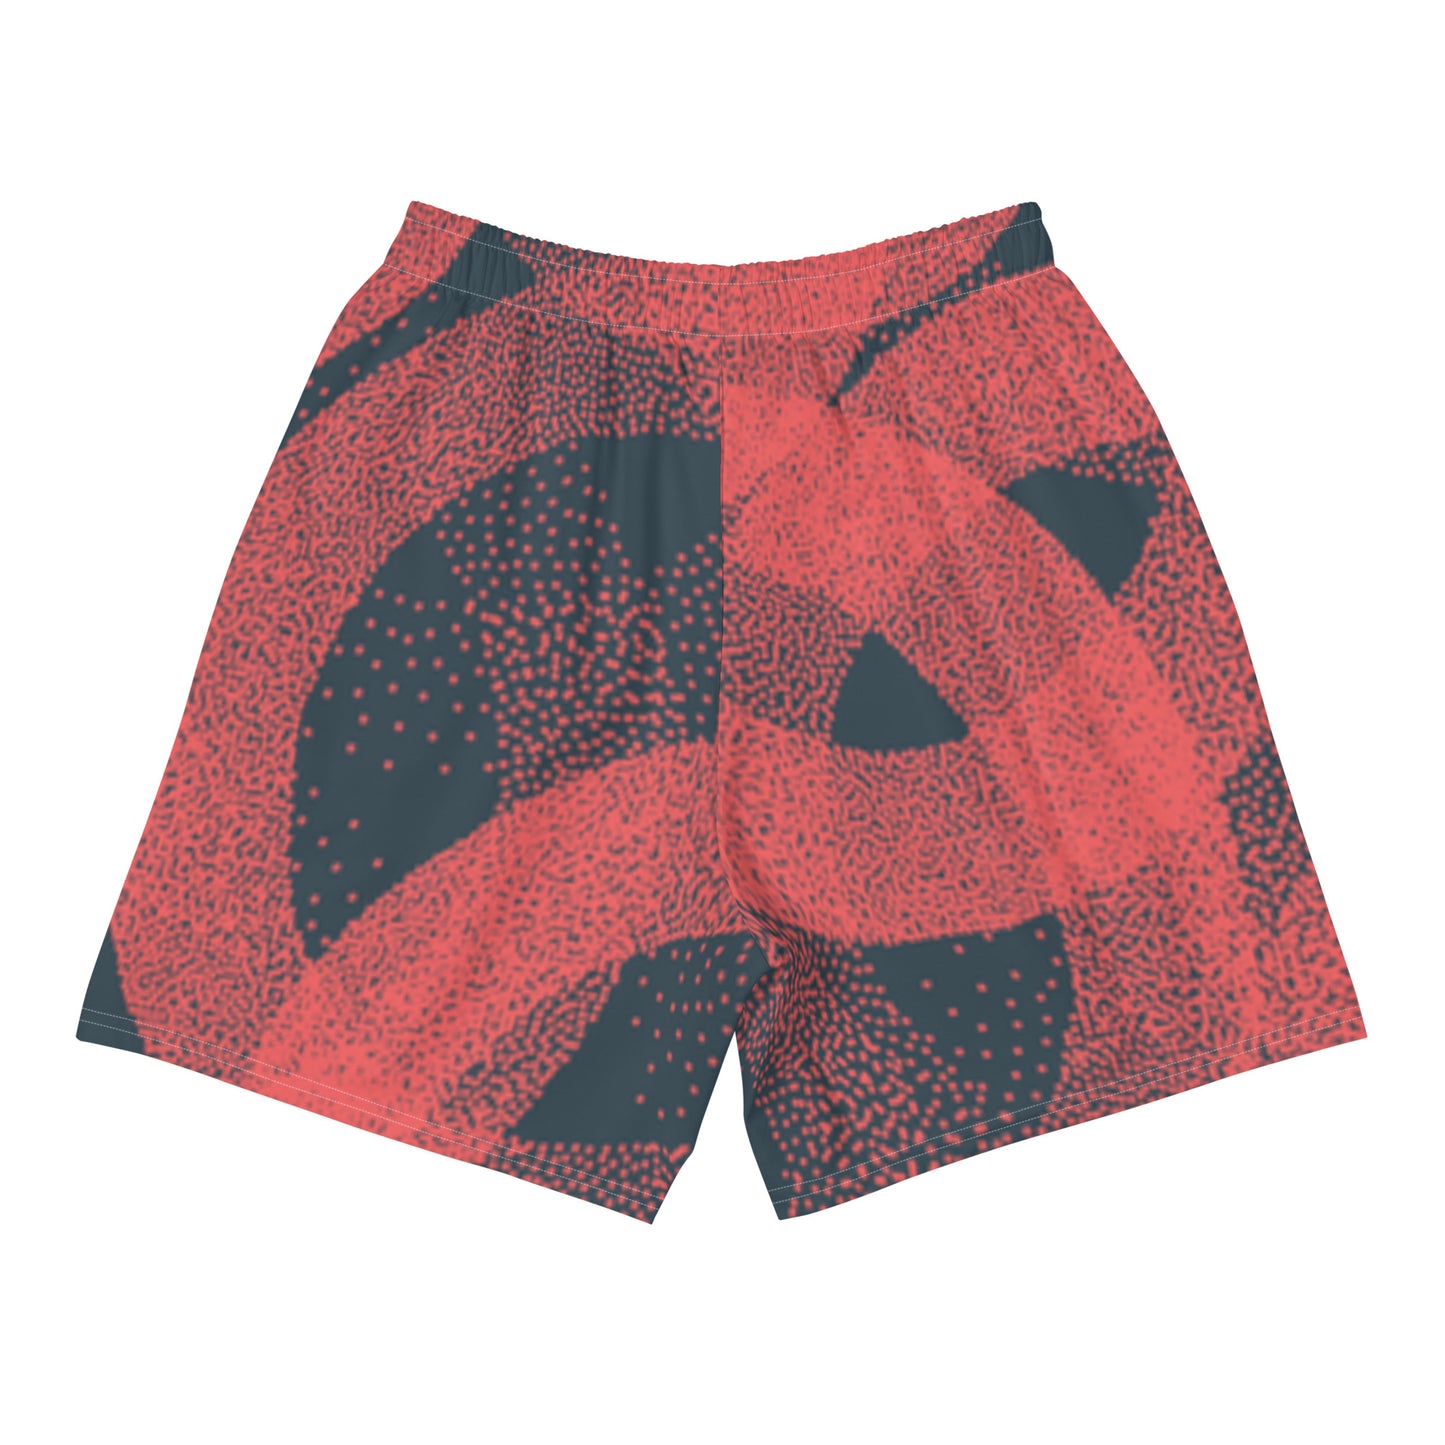 Circuitous Men's Recycled Trail Shorts